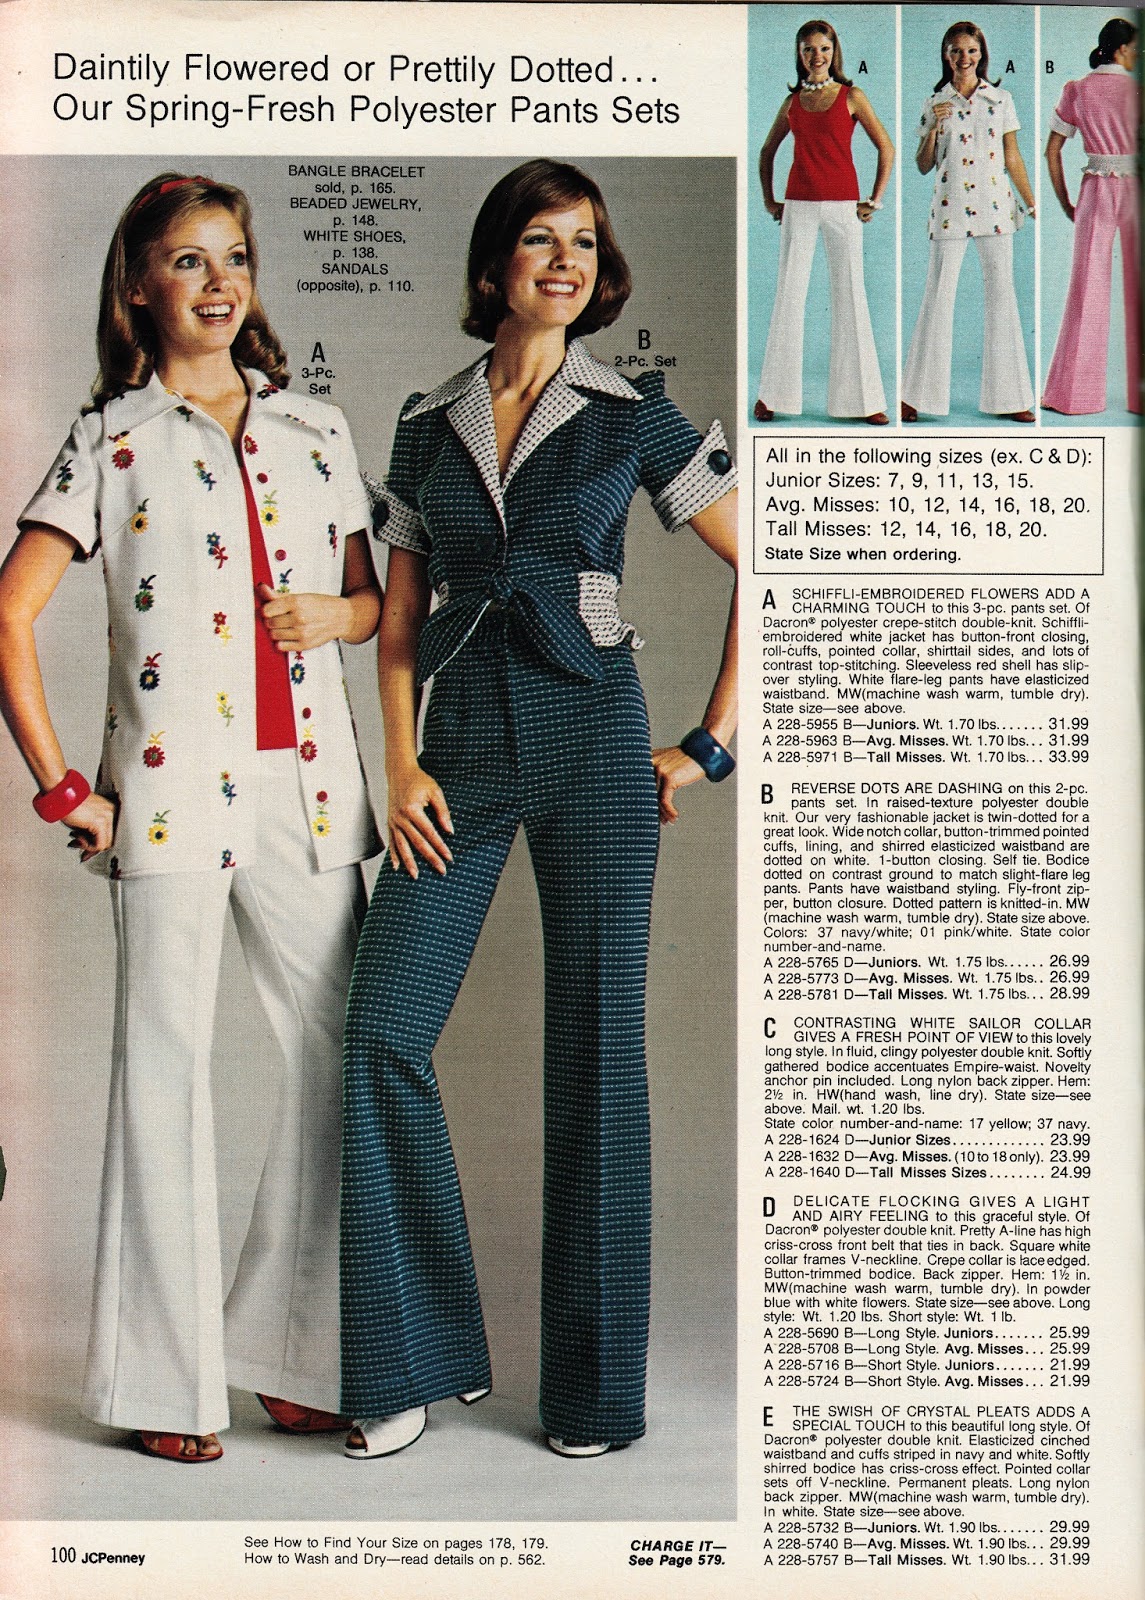 Kathy Loghry Blogspot: That's So 70s: High Rise Pants!!